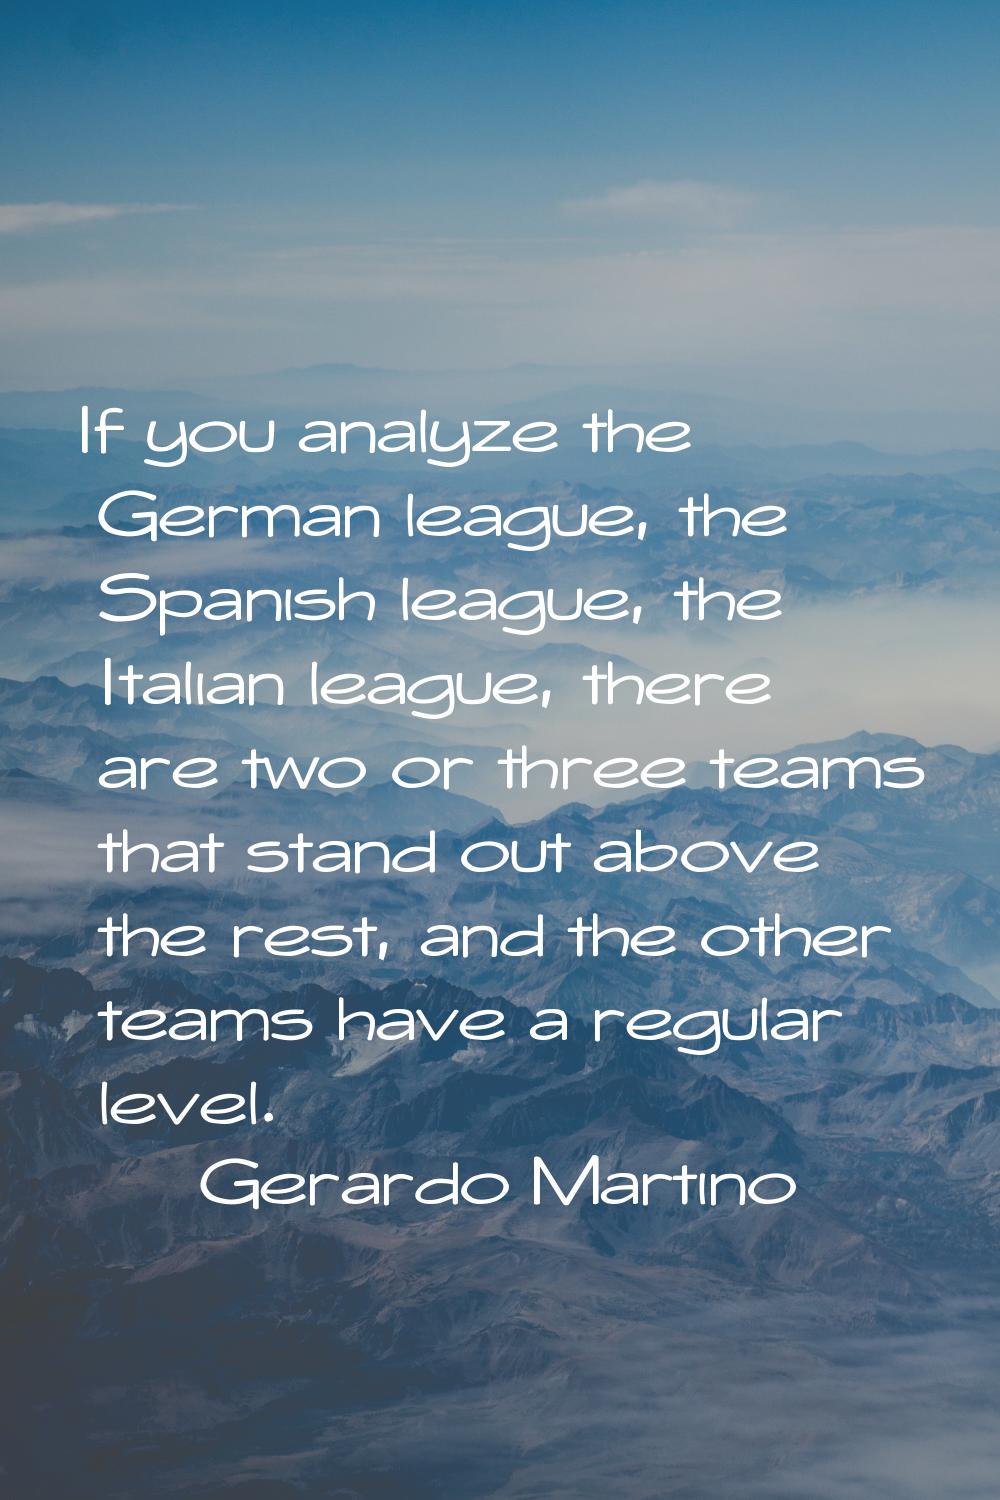 If you analyze the German league, the Spanish league, the Italian league, there are two or three te